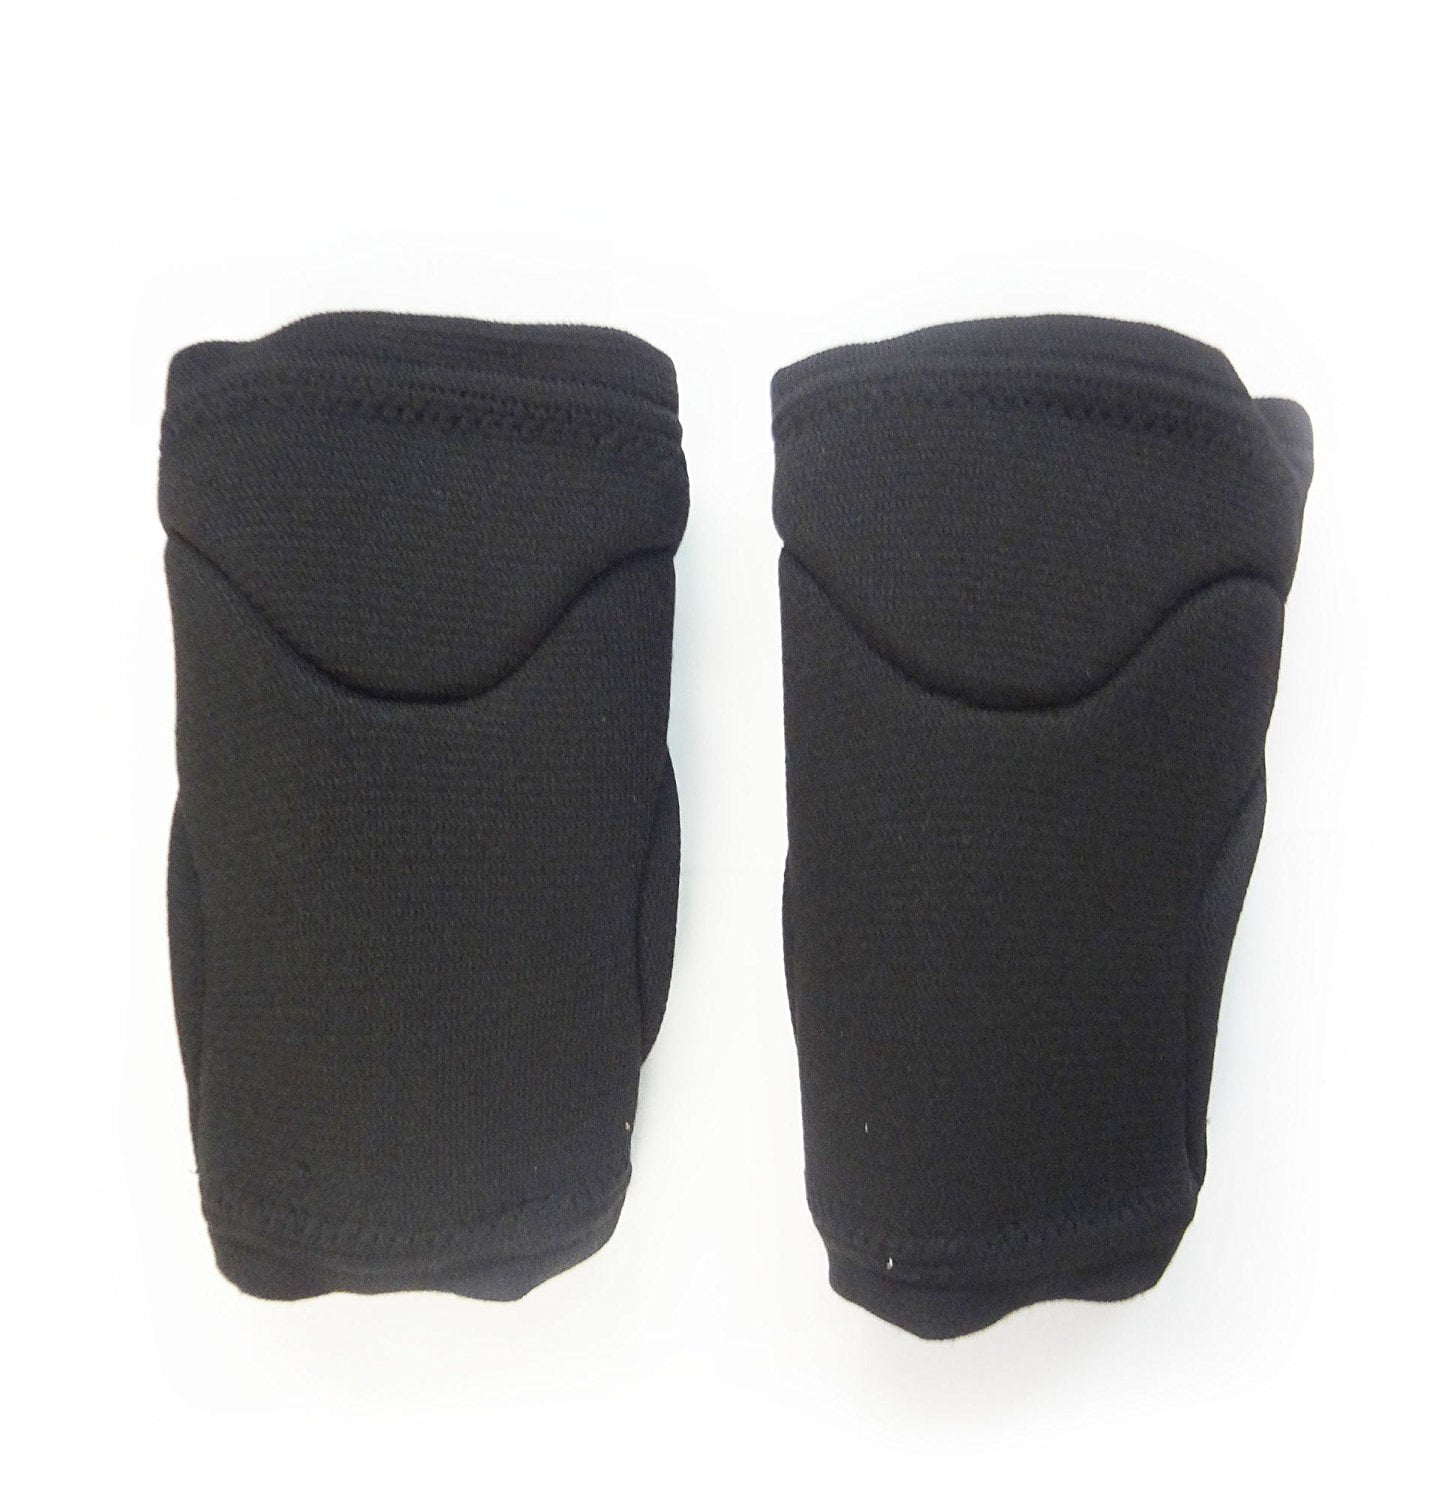 ACE 3m Elbow Pads One Size Black 1 Pair Model 908002 for sale online 